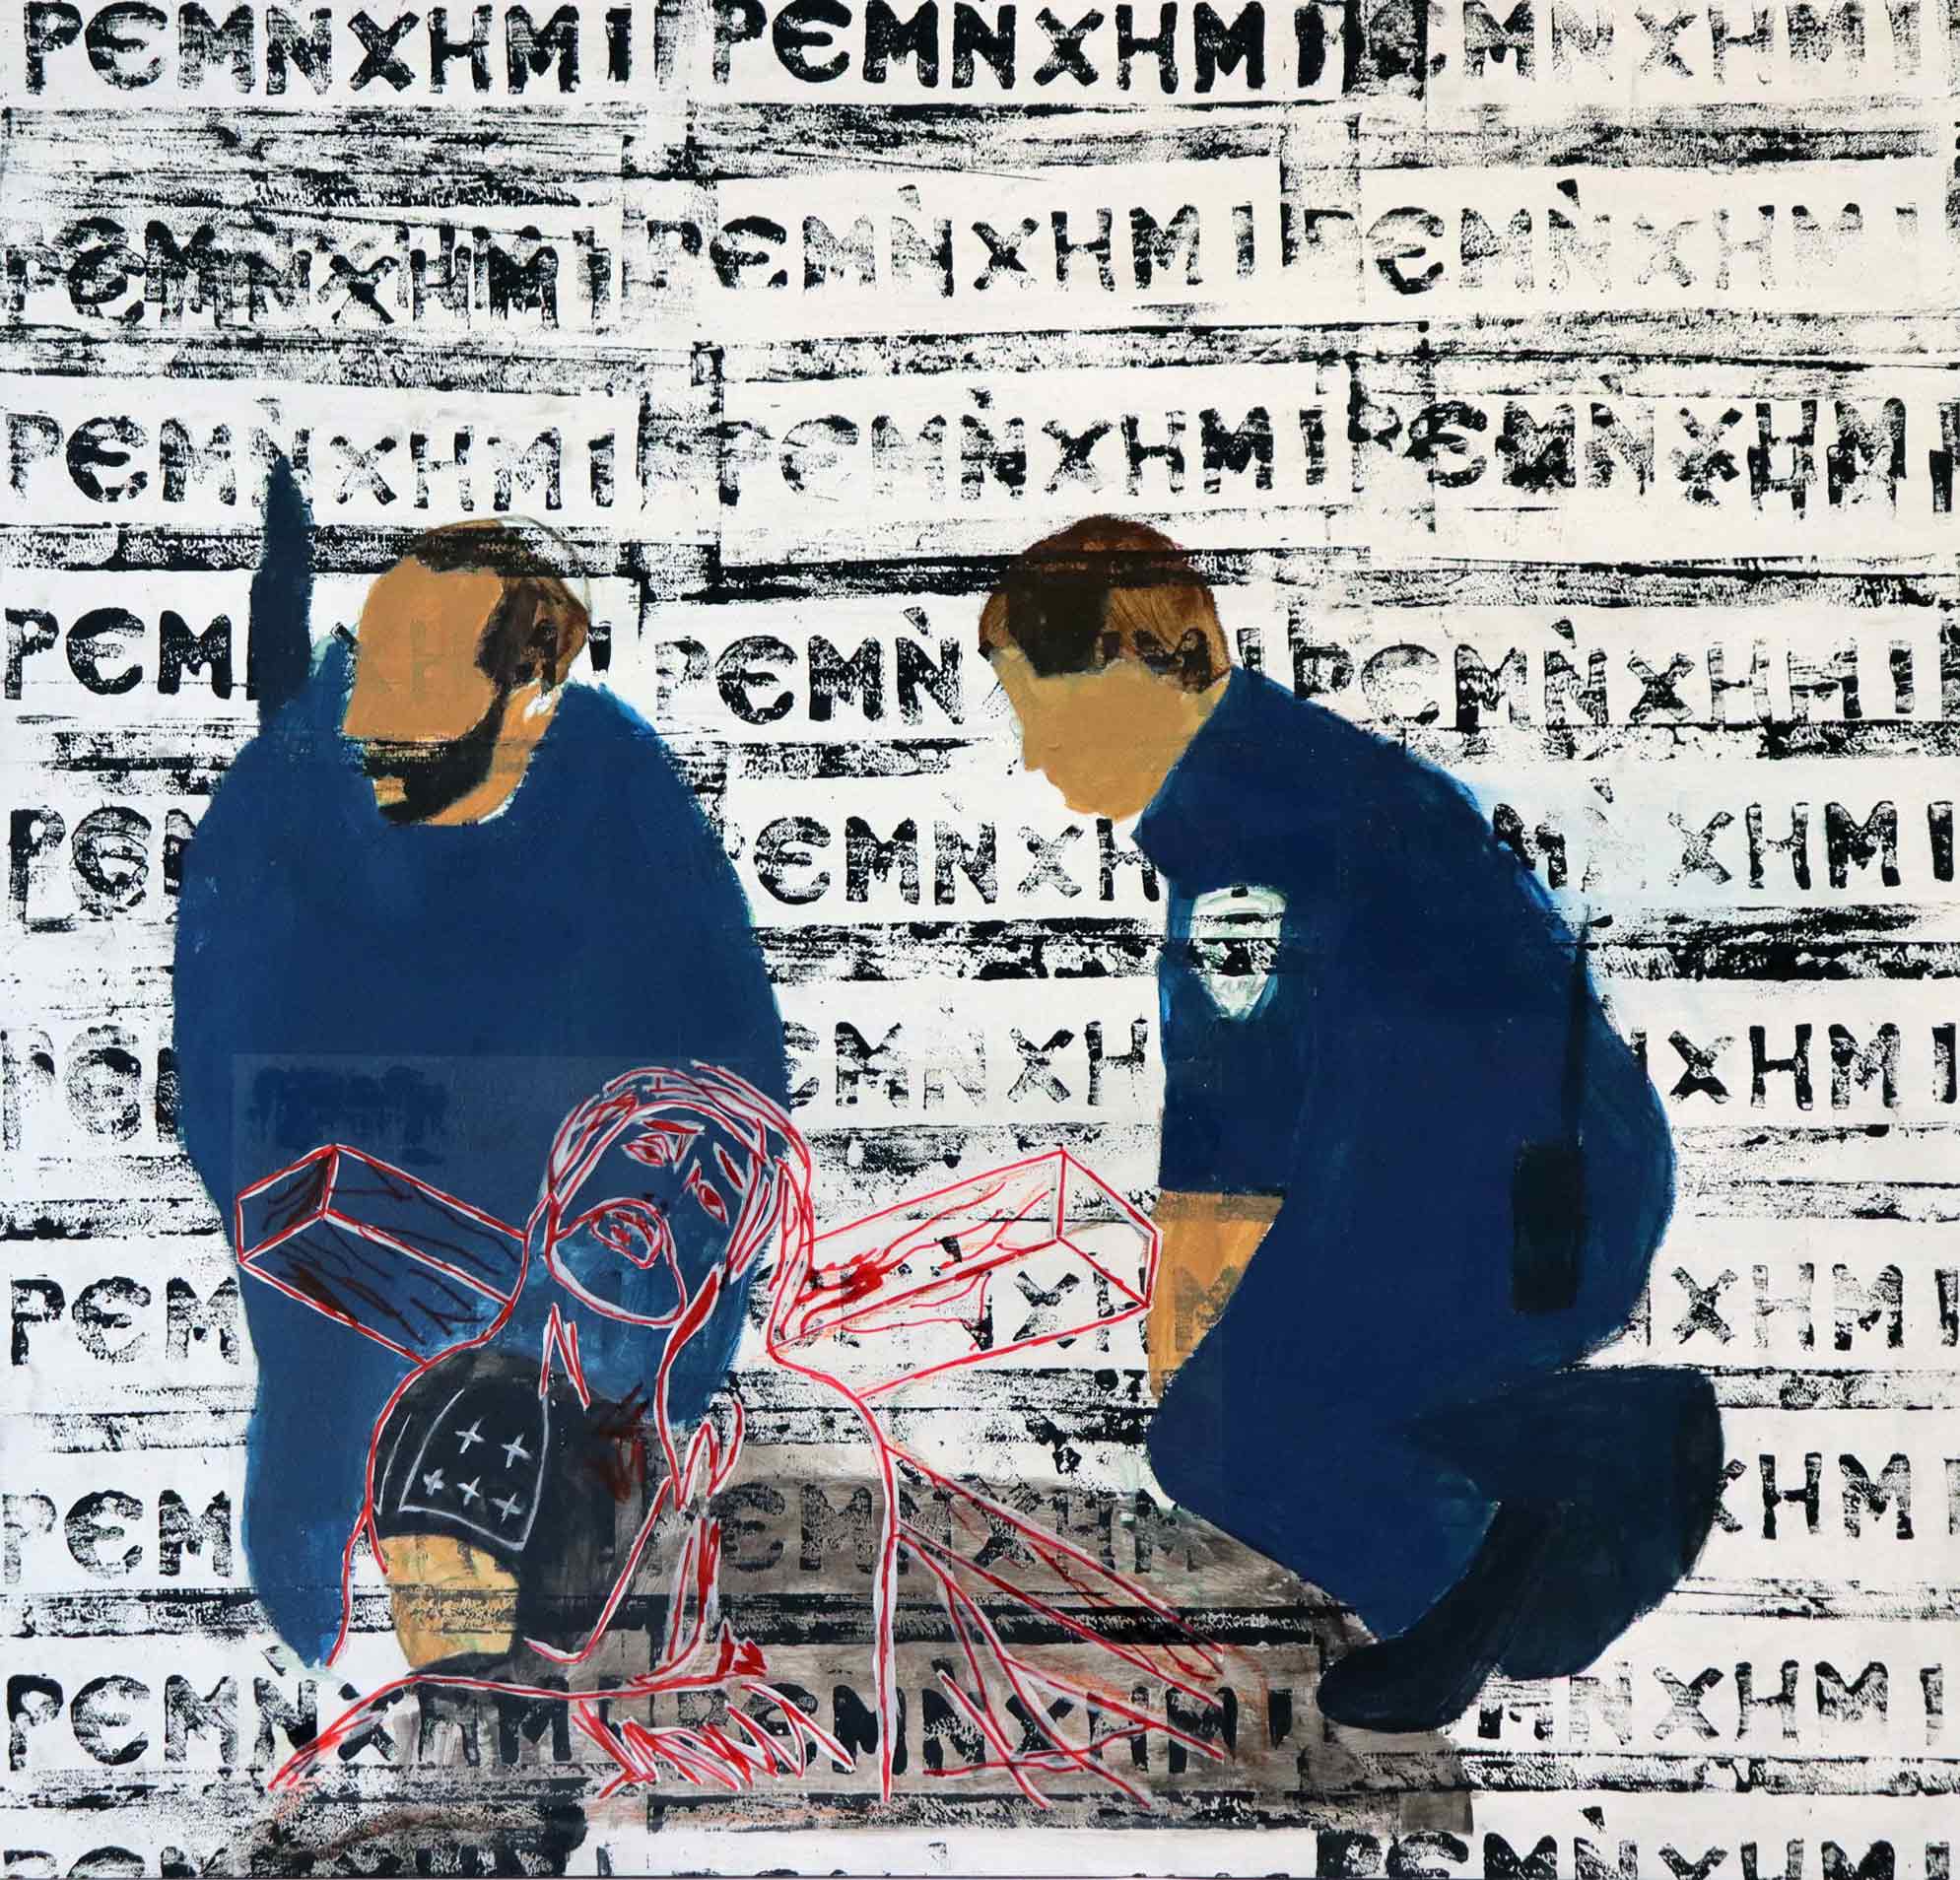 A collaged painting with elements of suffering. A police officer kneels beside another kneeling man. Repeated text covers the background.